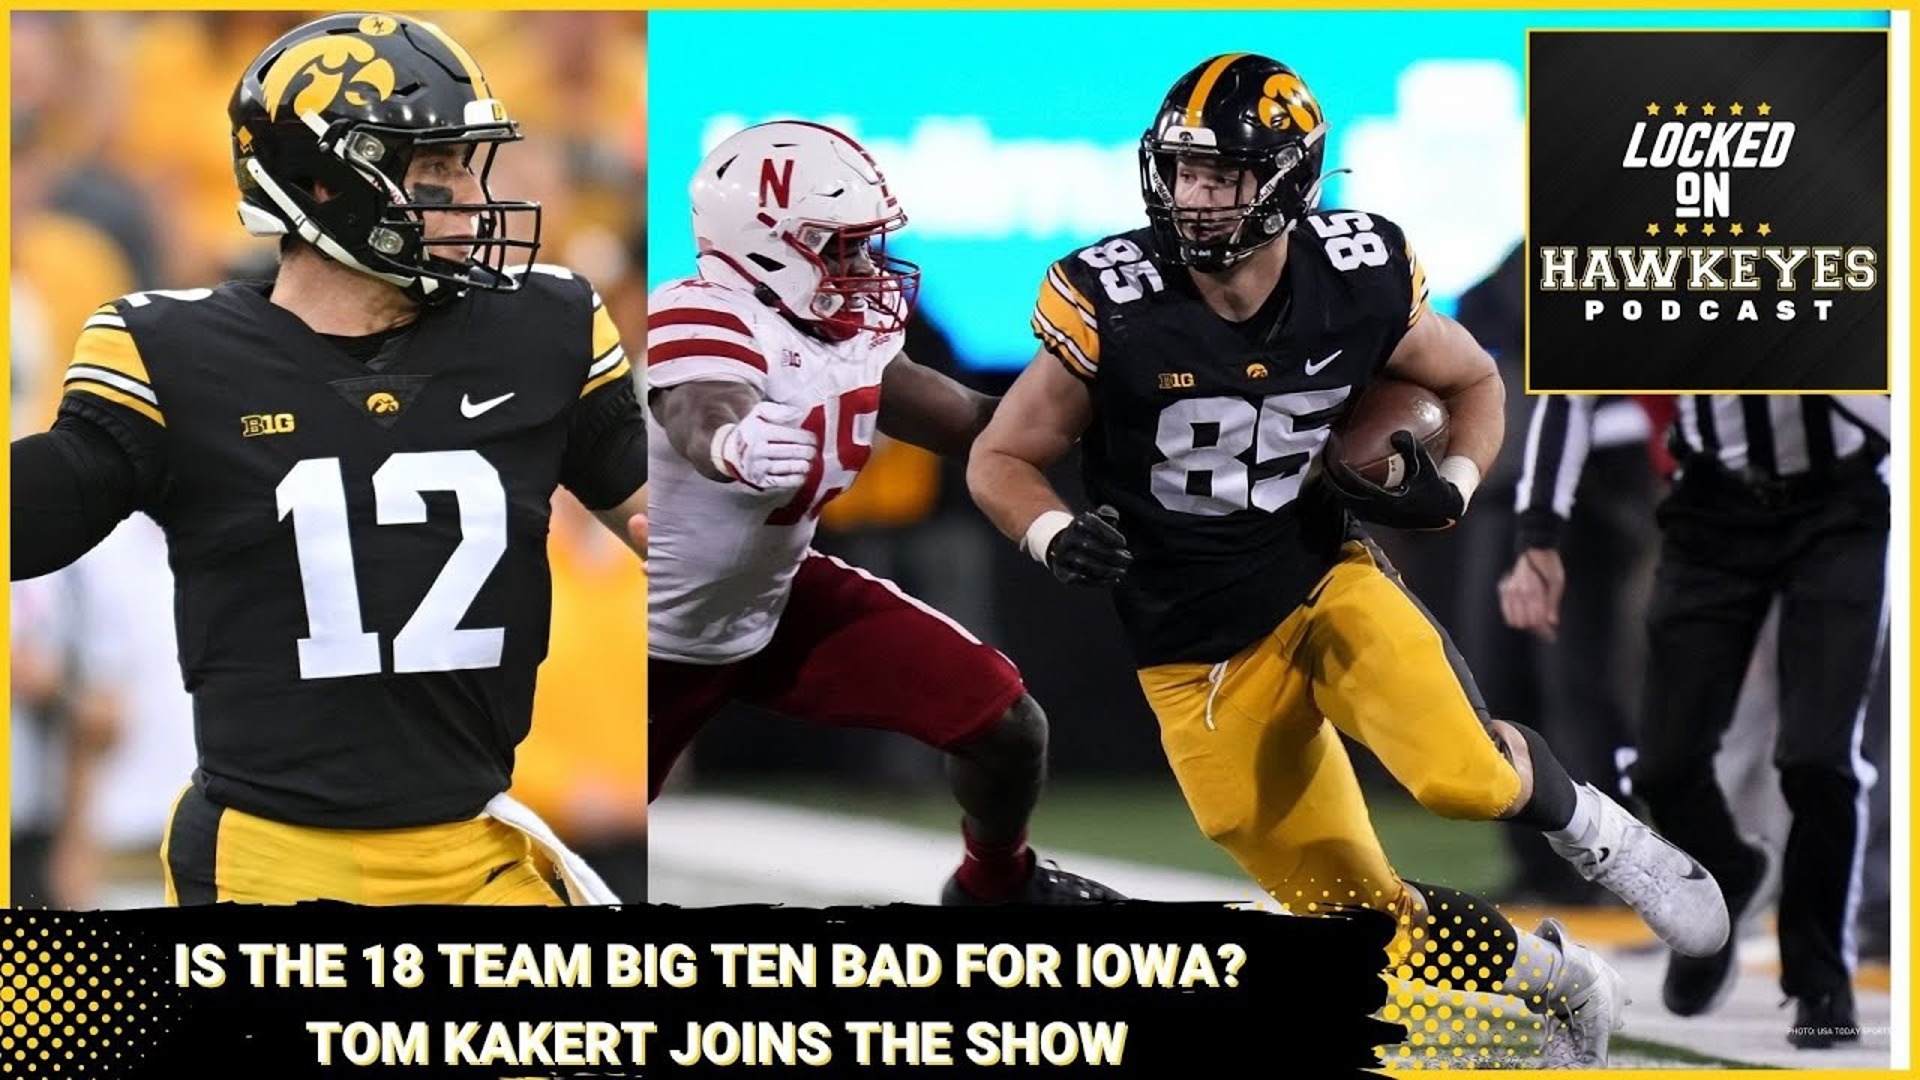 Trent Condon is back for a post 4th of July episode of the Locked on Hawkeyes Podcast.